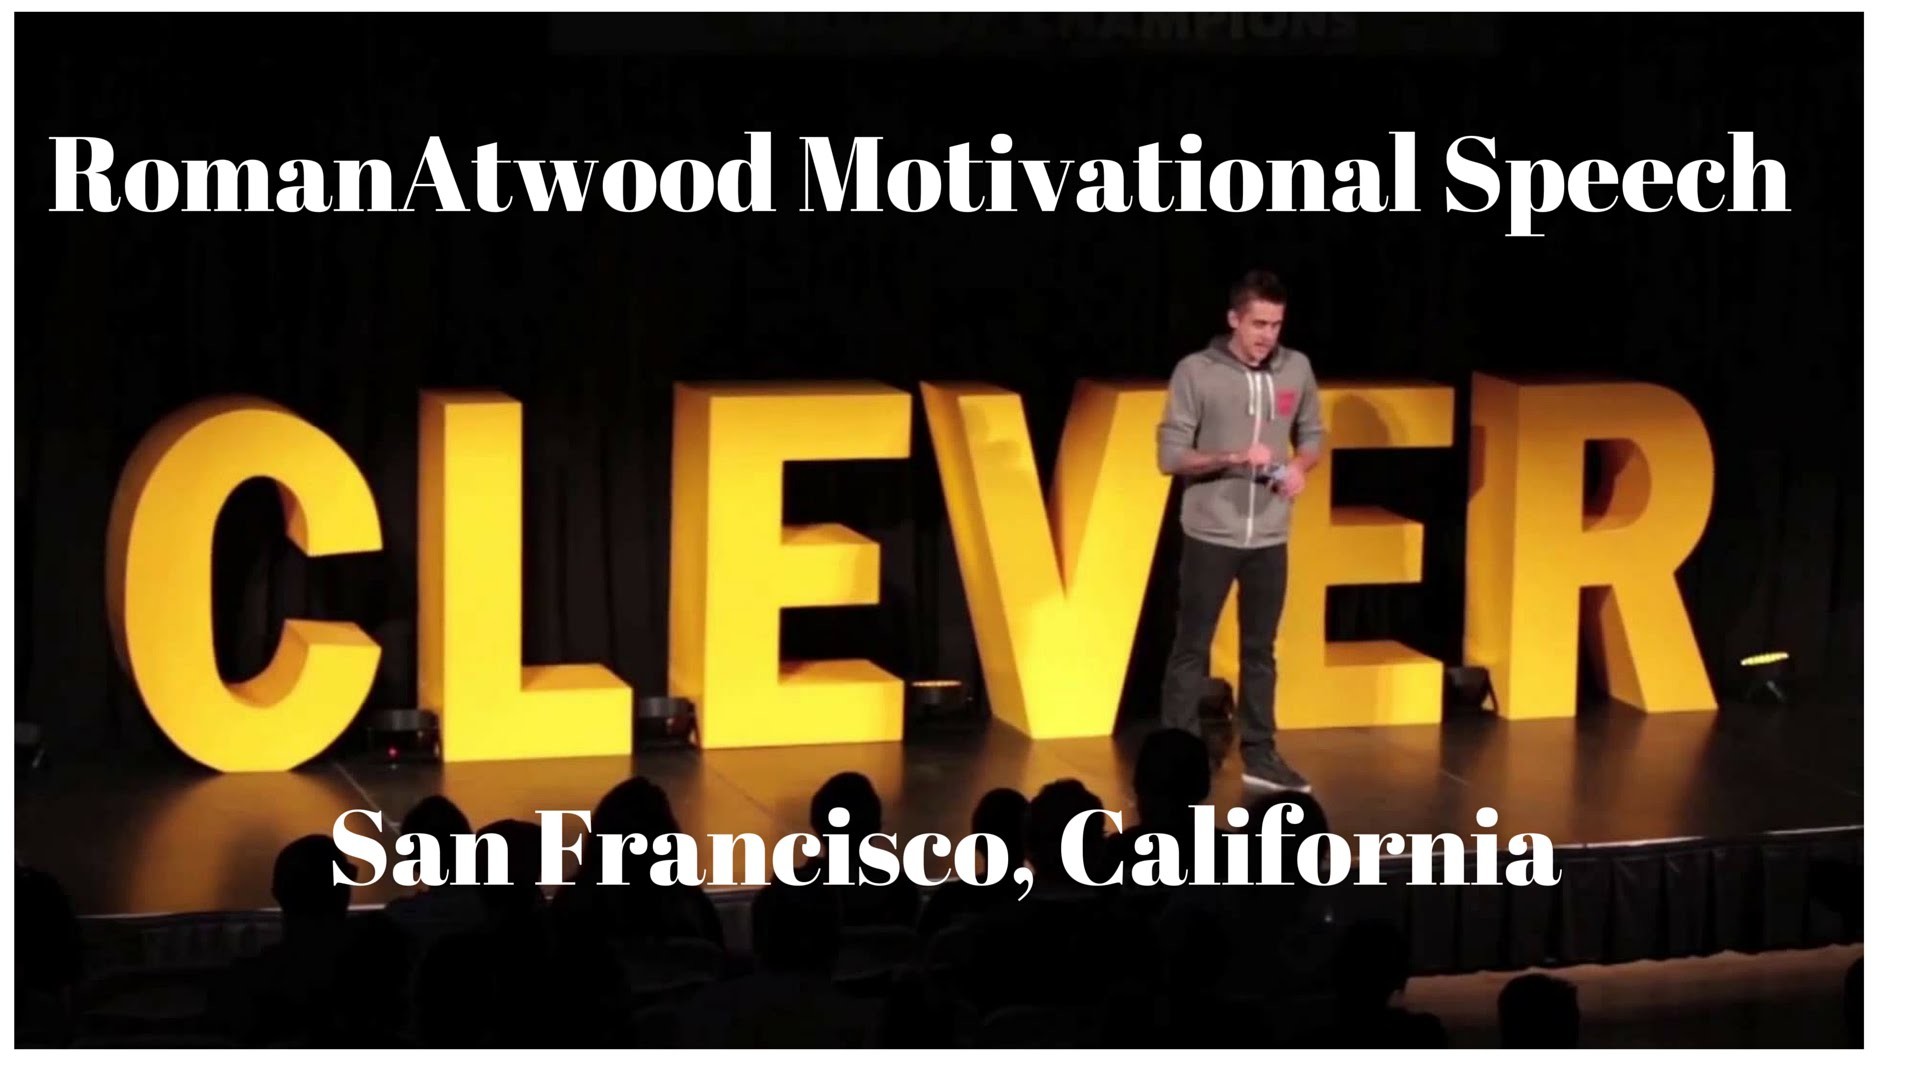 1920x1080 Roman Atwood Motivational Speech & Life Story - Smile More :)